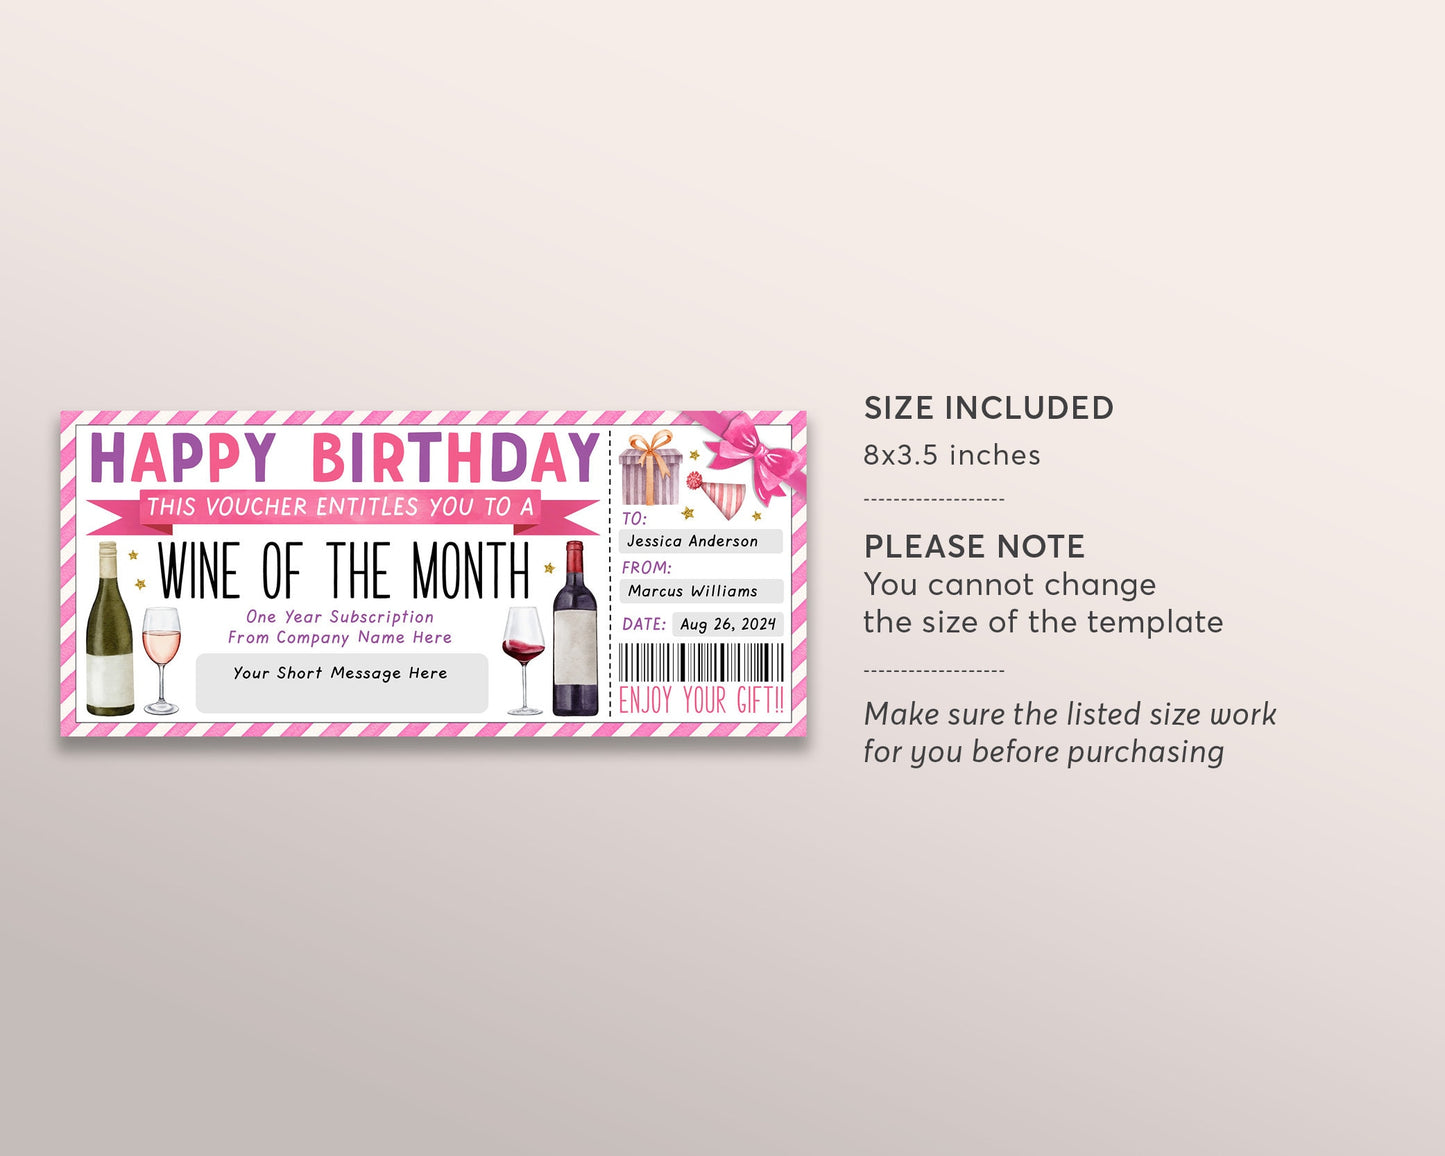 Wine Subscription Gift Certificate Editable Template, Birthday Surprise Wine Club Membership Voucher, Wine of the Month Coupon, Wine Tasting